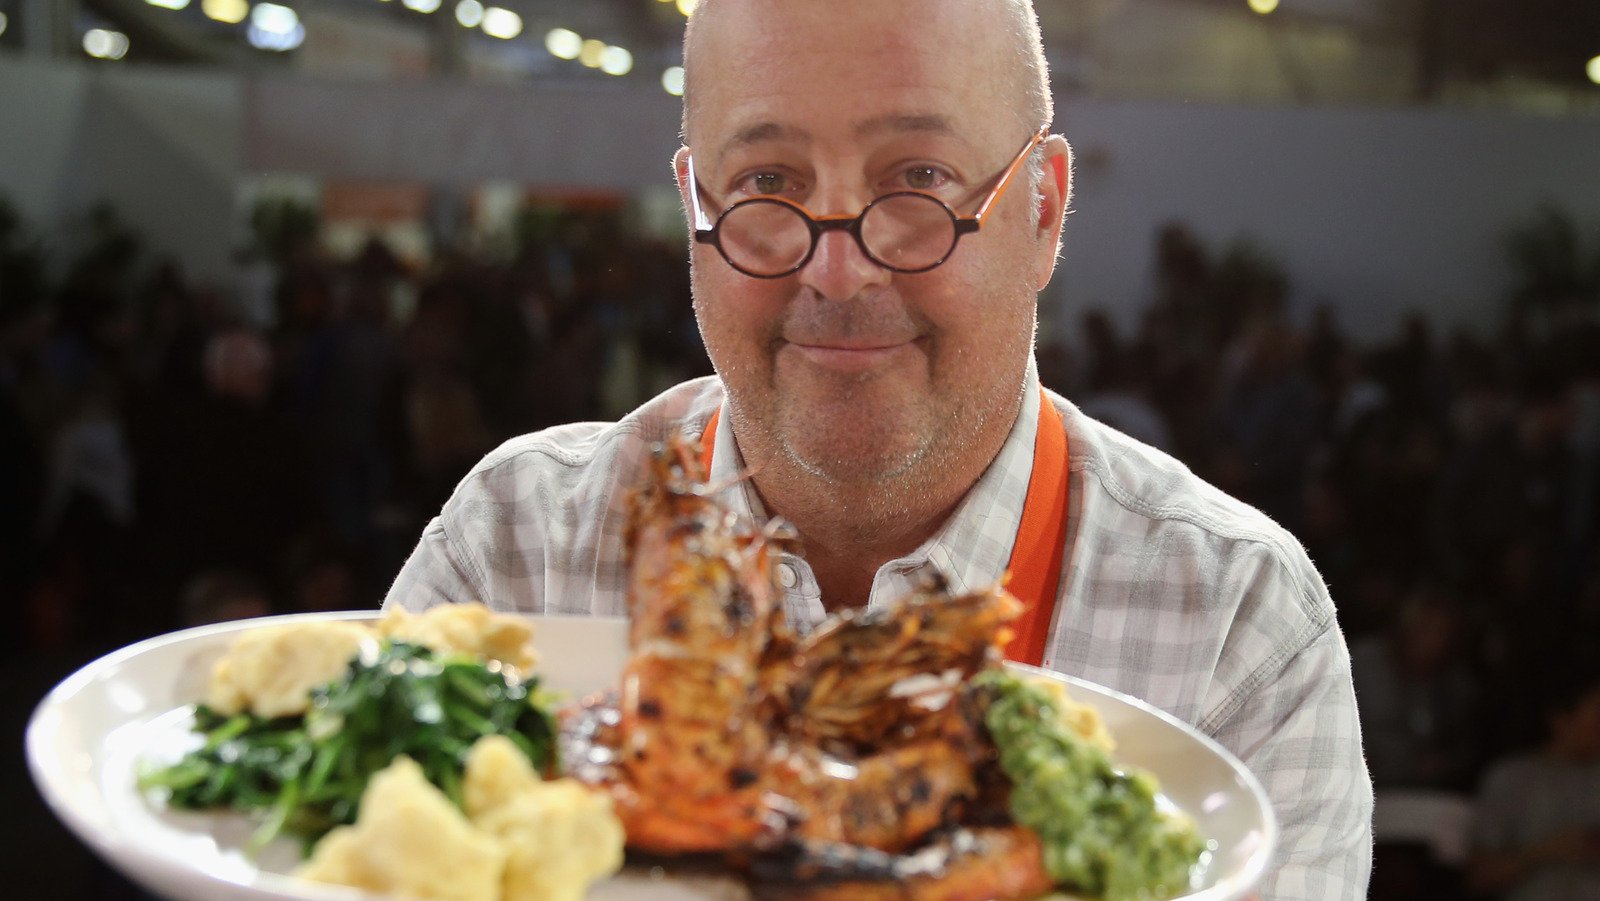 Andrew Zimmern's Favorite Eats For A Key West Vacation